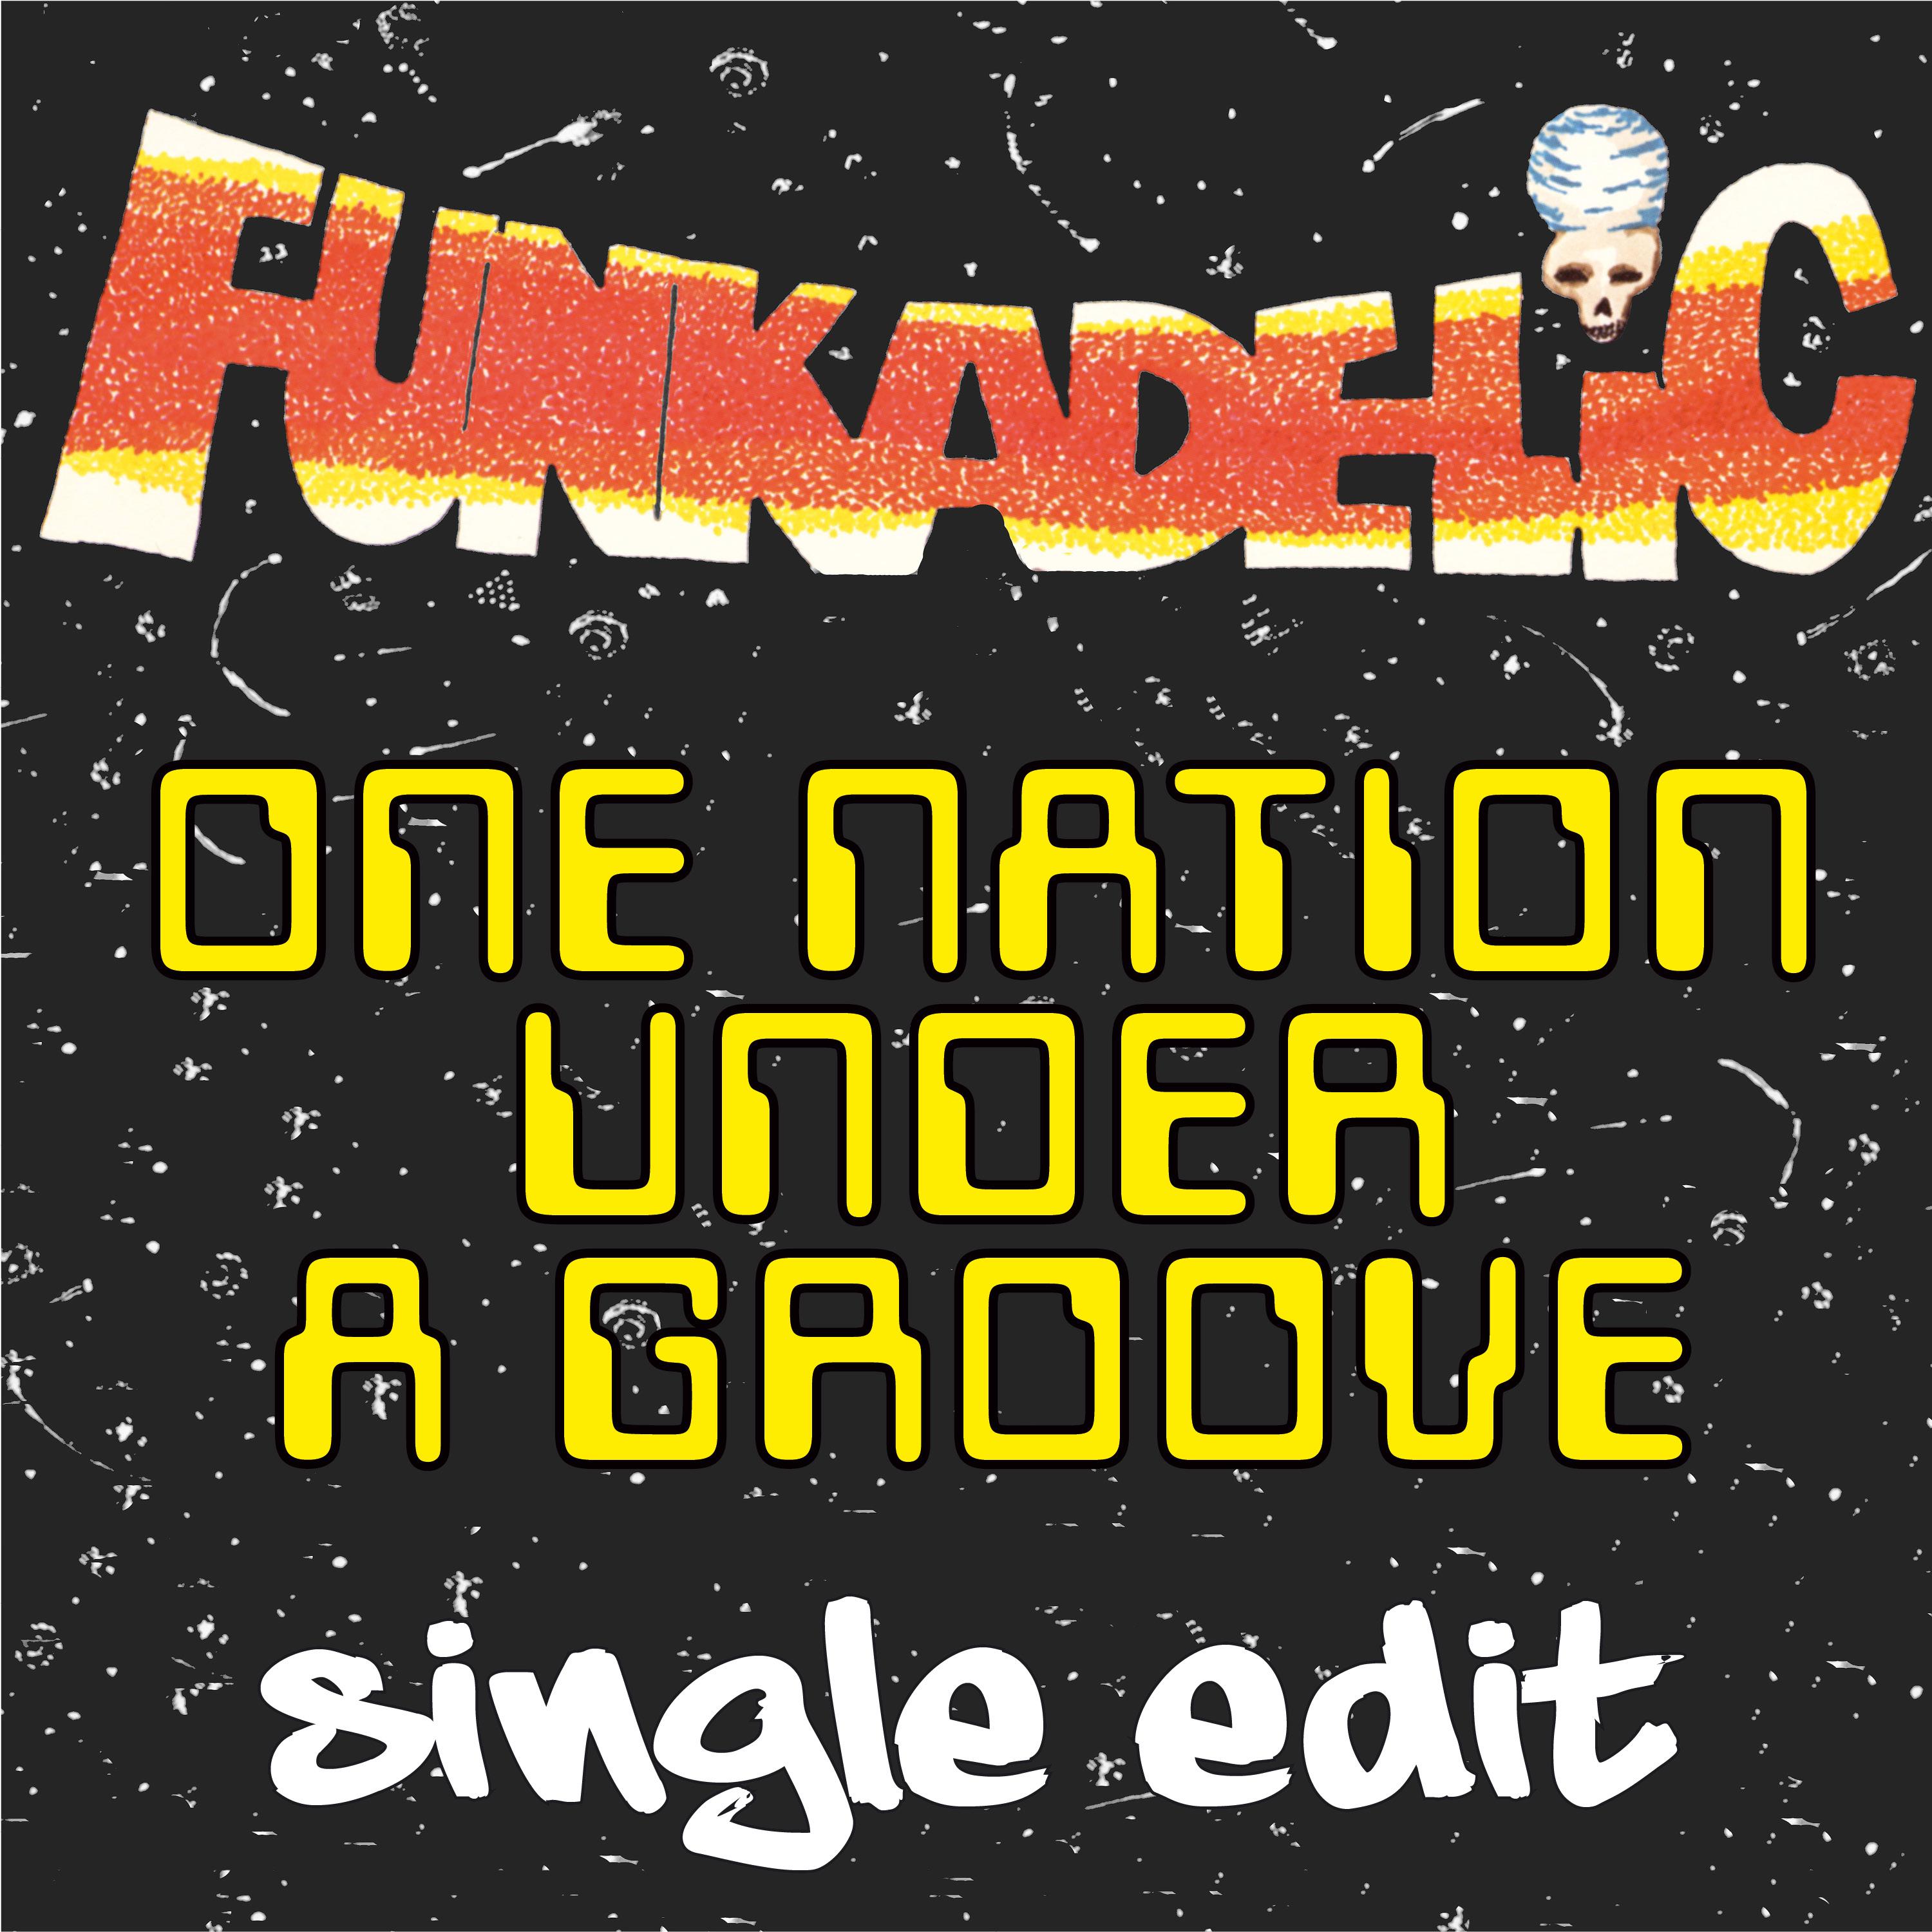 One Nation Under a Groove (2016 Remaster)